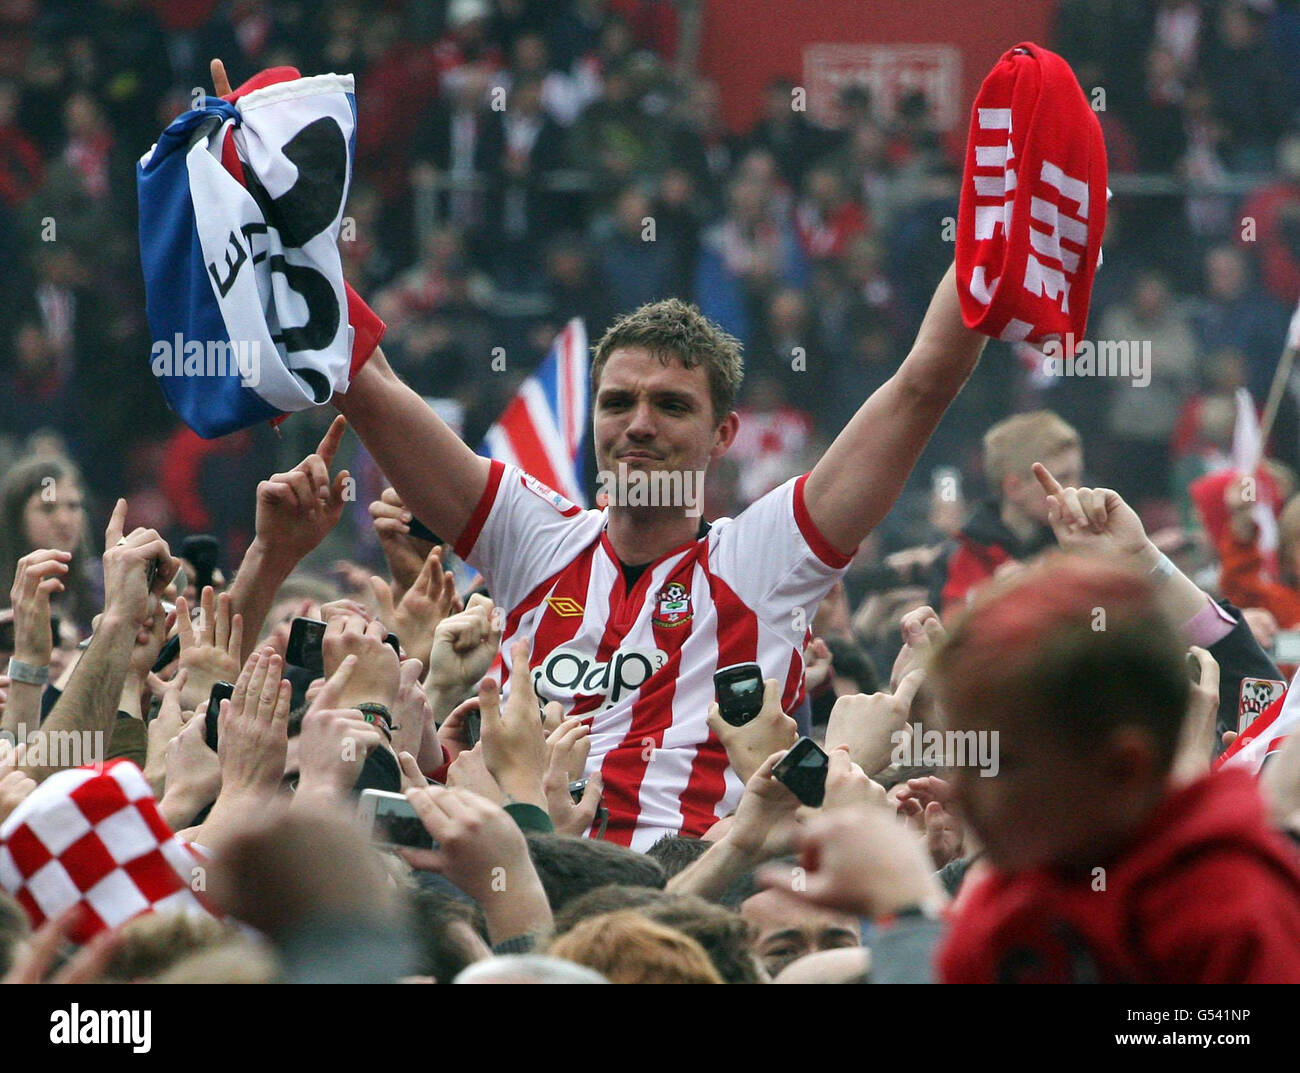 Southampton's Jos Hooiveld is carried off the pitch by jubilant fans at the end of the game following the clubs promotion to the Premier League during the npower Football League Championship match at St Mary's, Southampton. Stock Photo